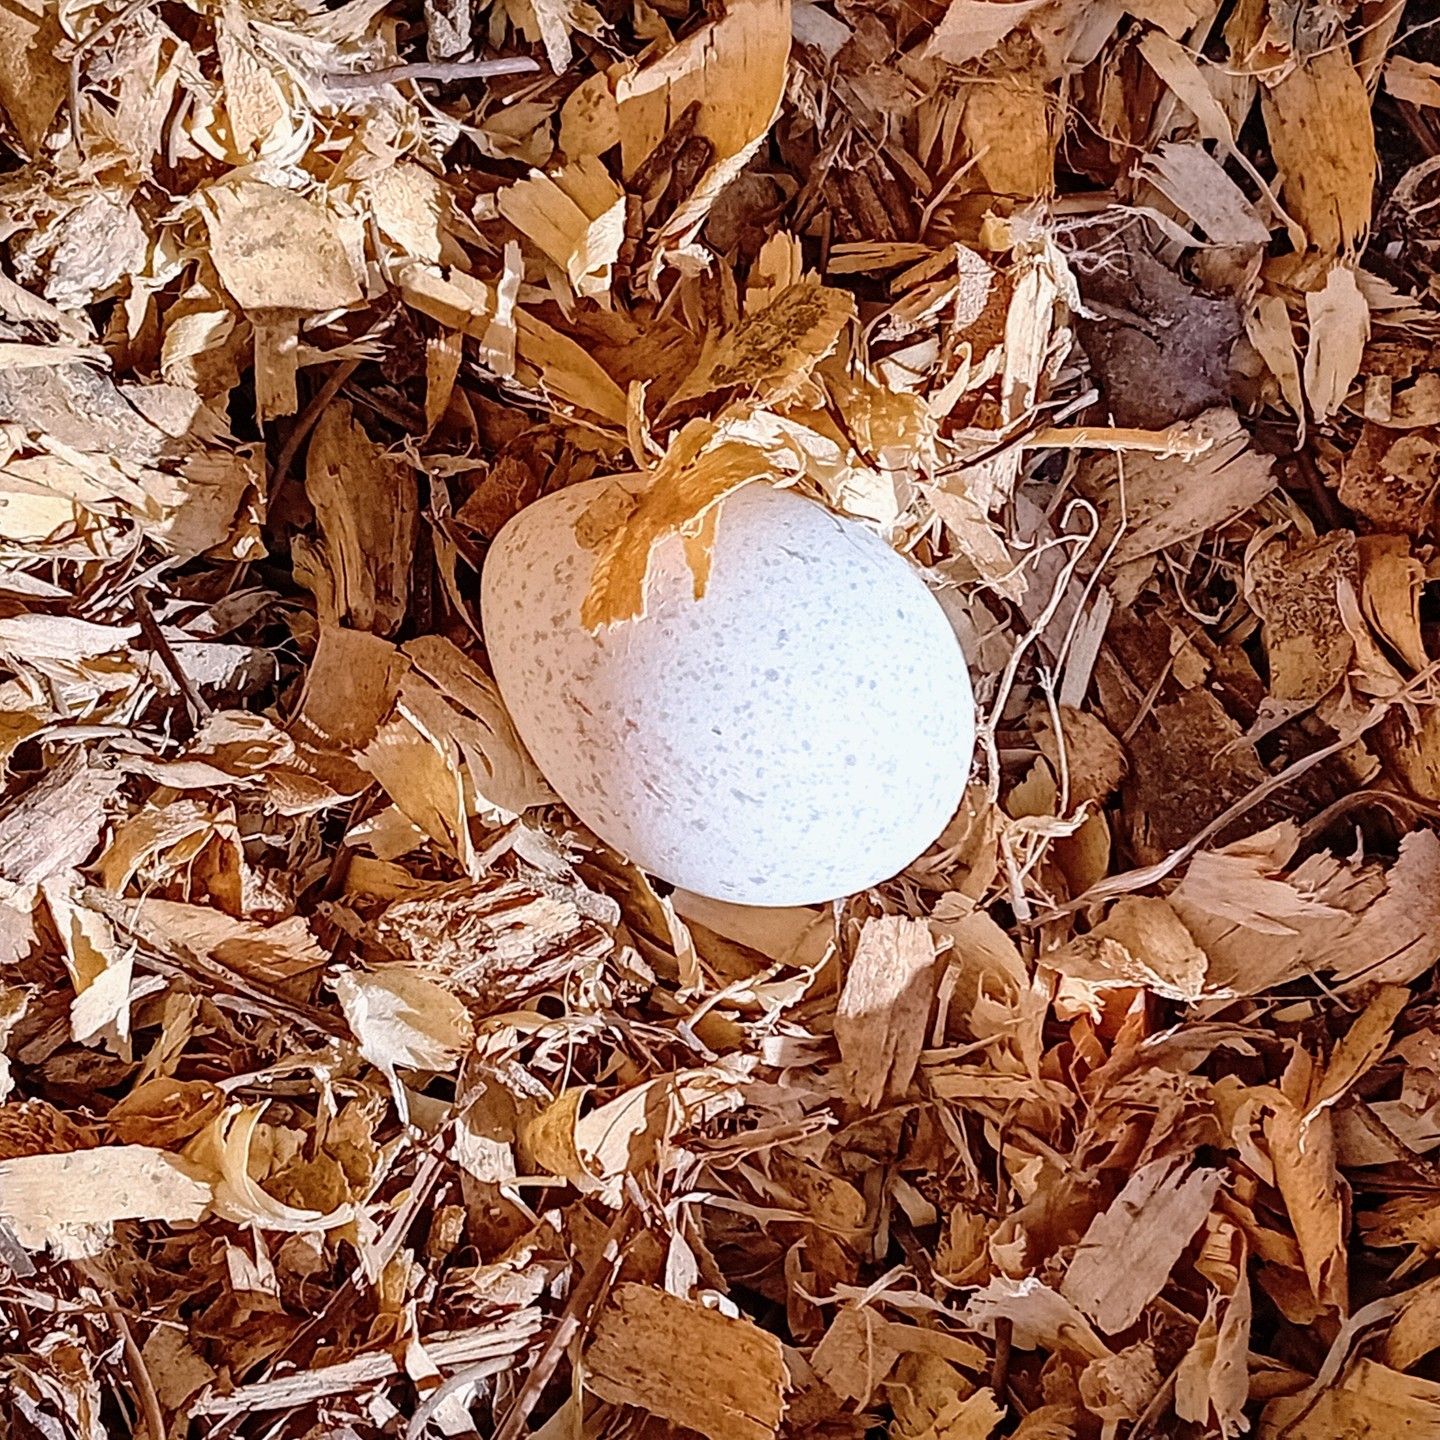 The first turkey egg!